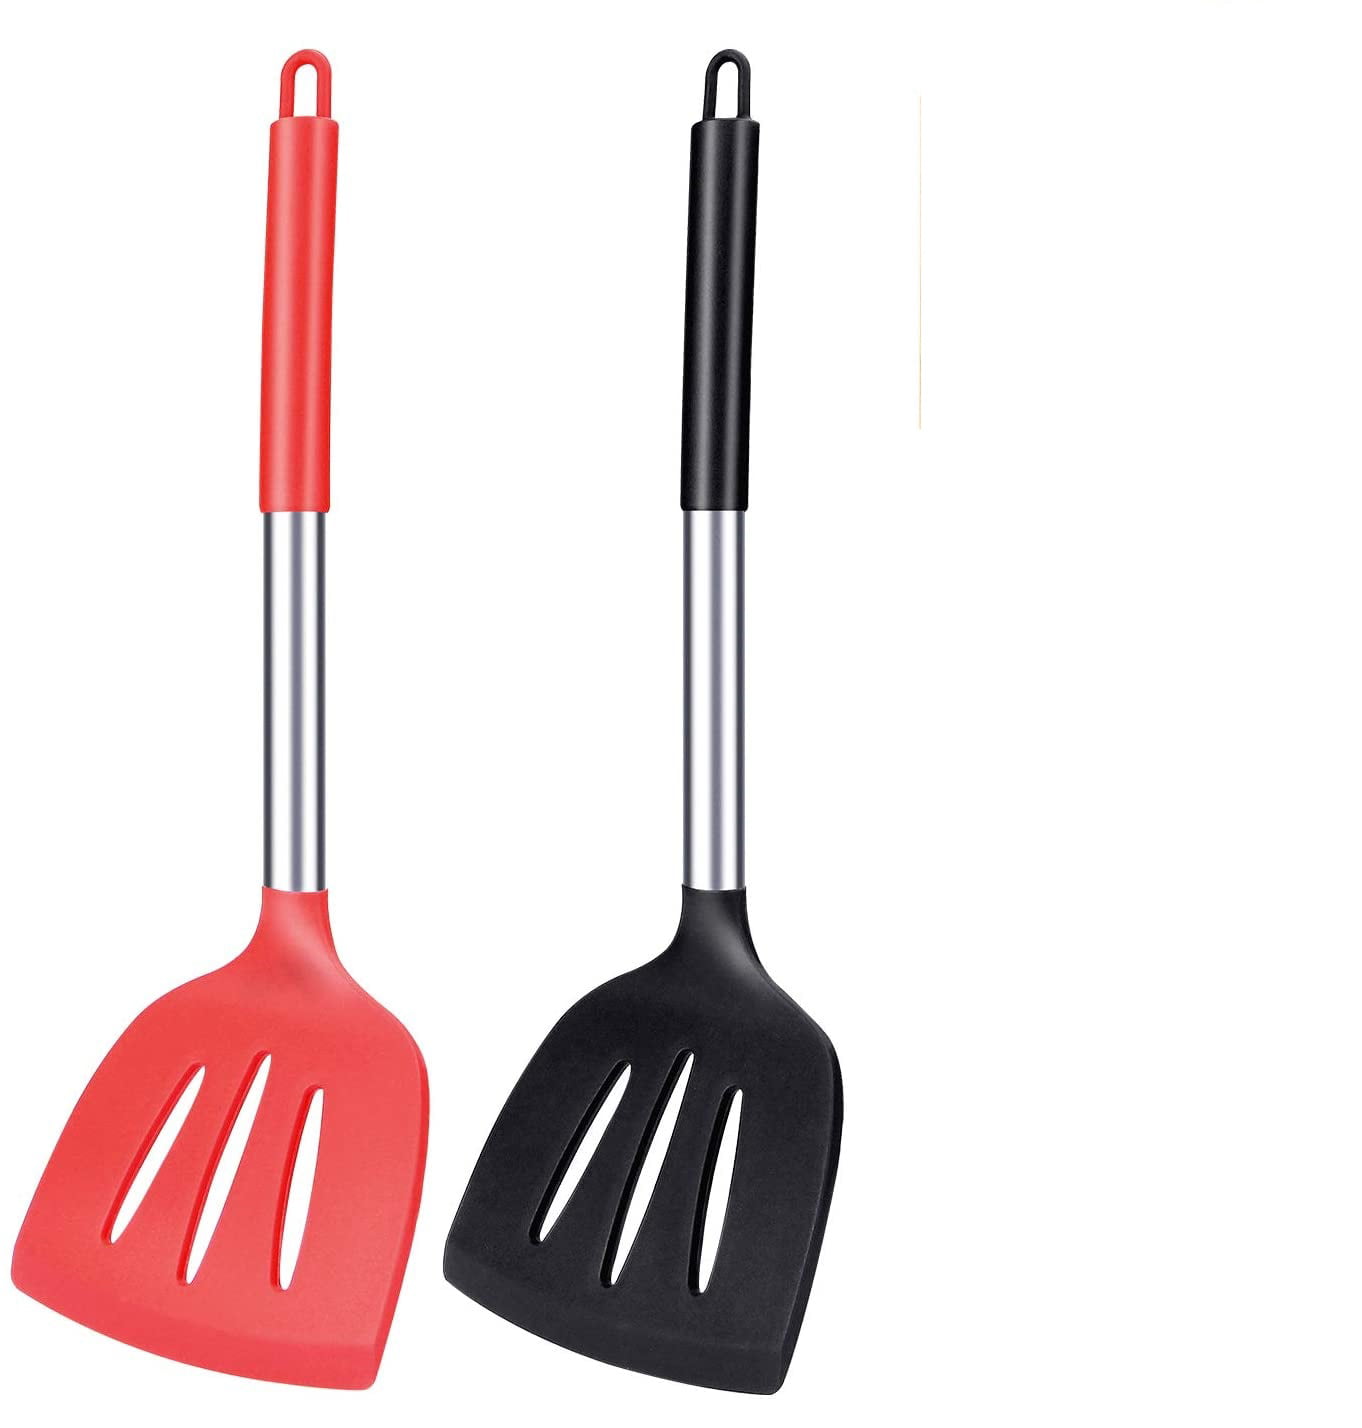 Details about   Silicone Spatula Nonstick Fish Slice Eggs Turners Kitchen Cooking New O0T8